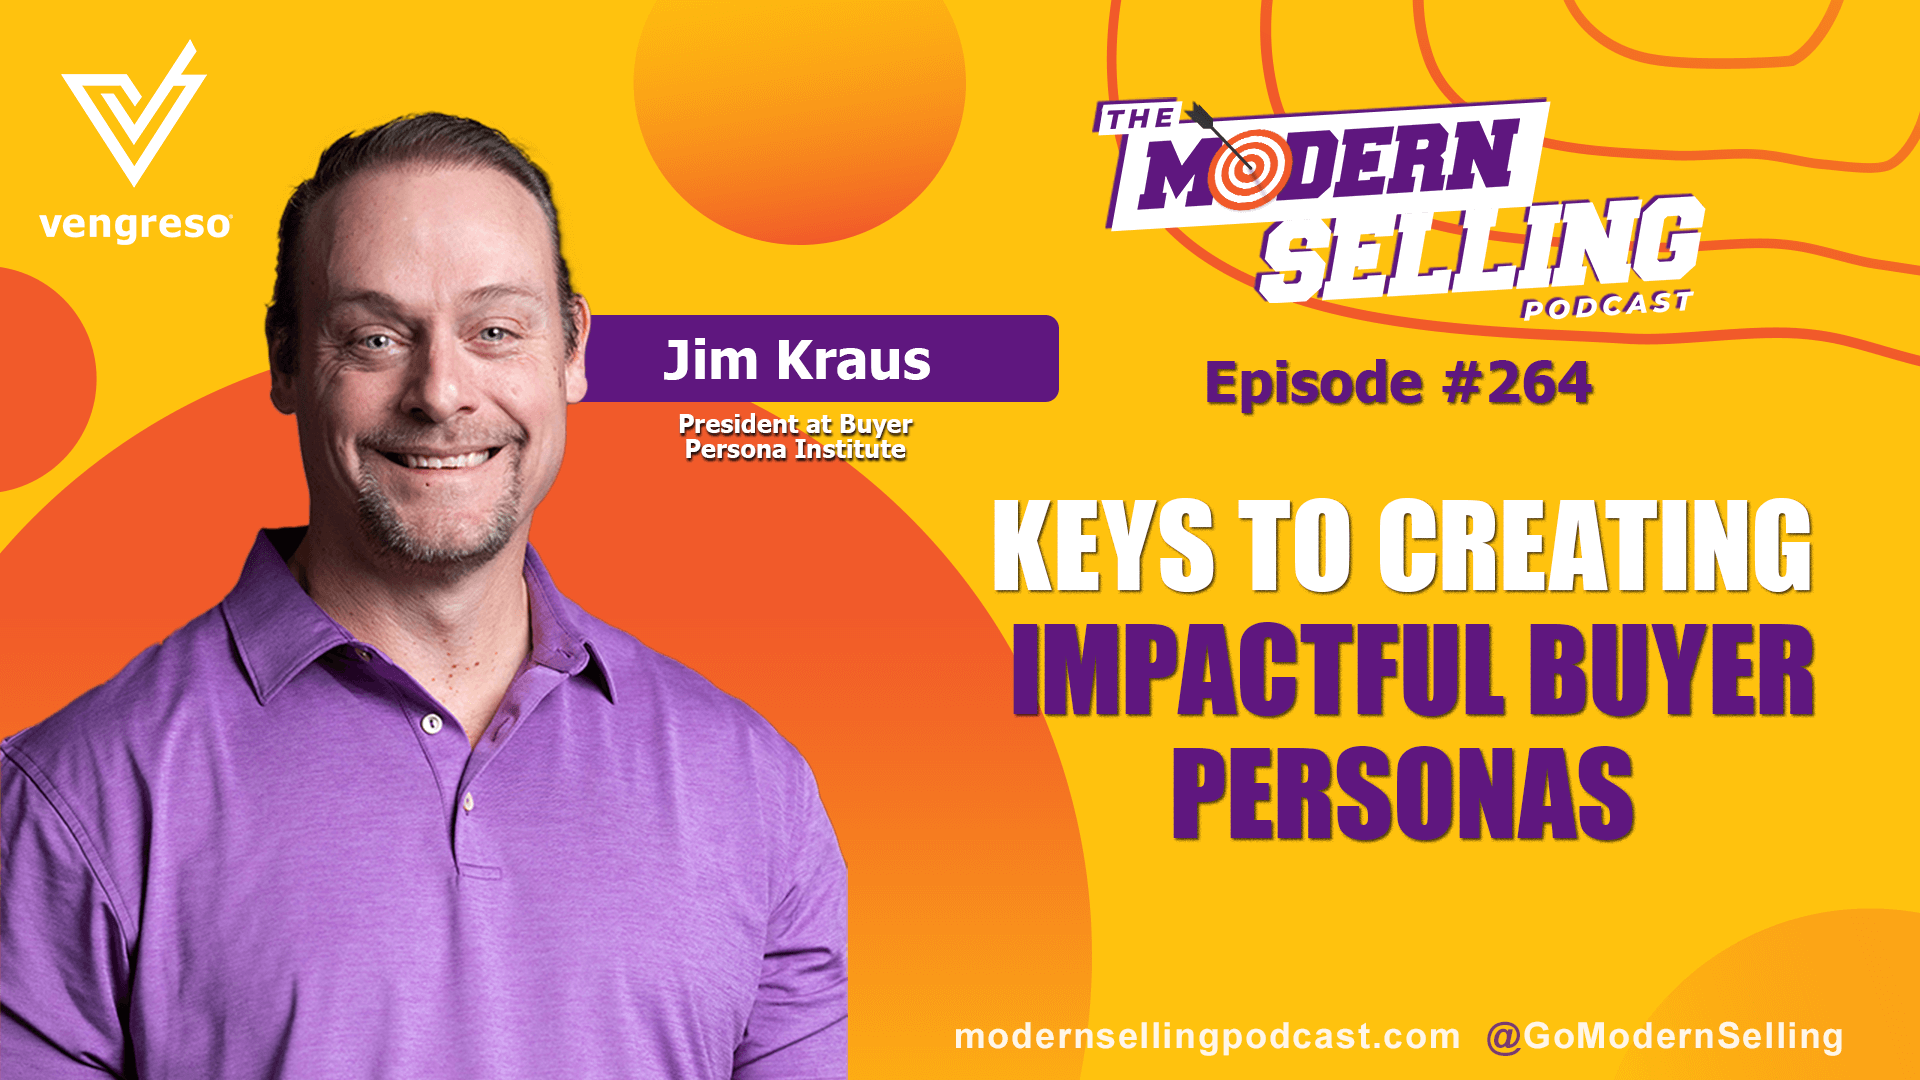 Smiling man featured on the promotional graphic for episode #264 of the modern selling podcast, discussing "keys to creating impactful buyer personas" for enhanced SEO.